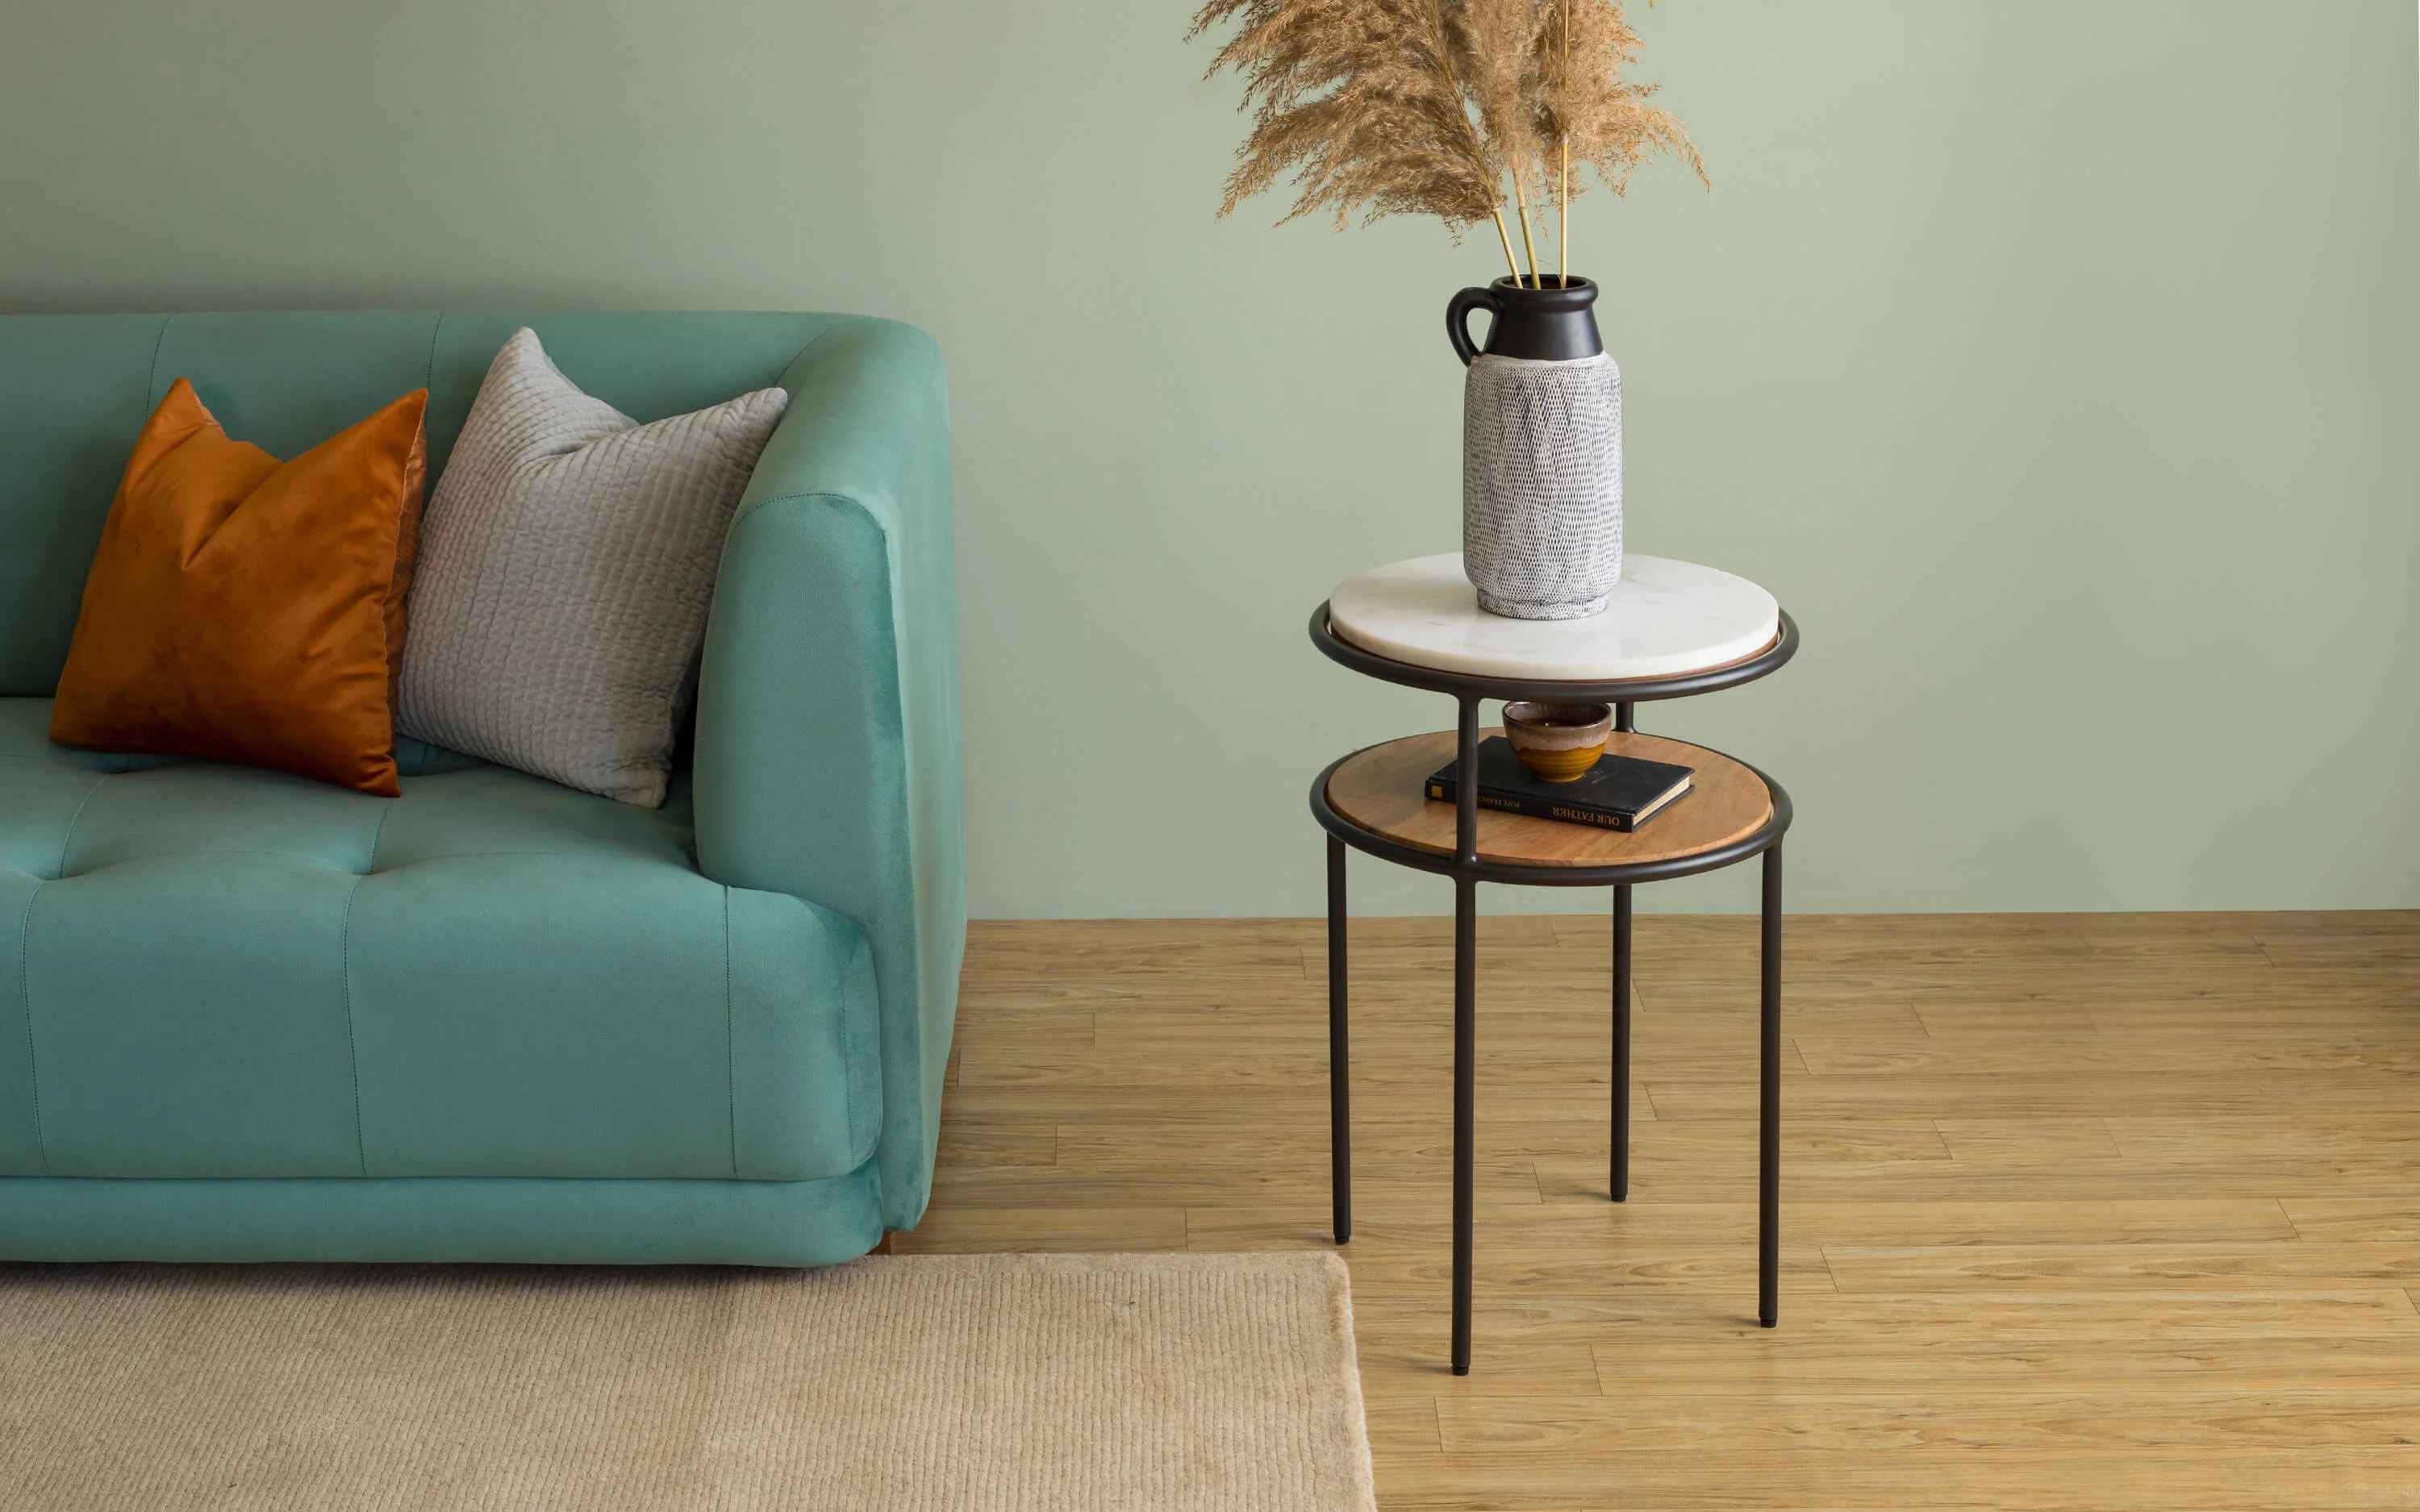 Dotto Upholstered Pouf